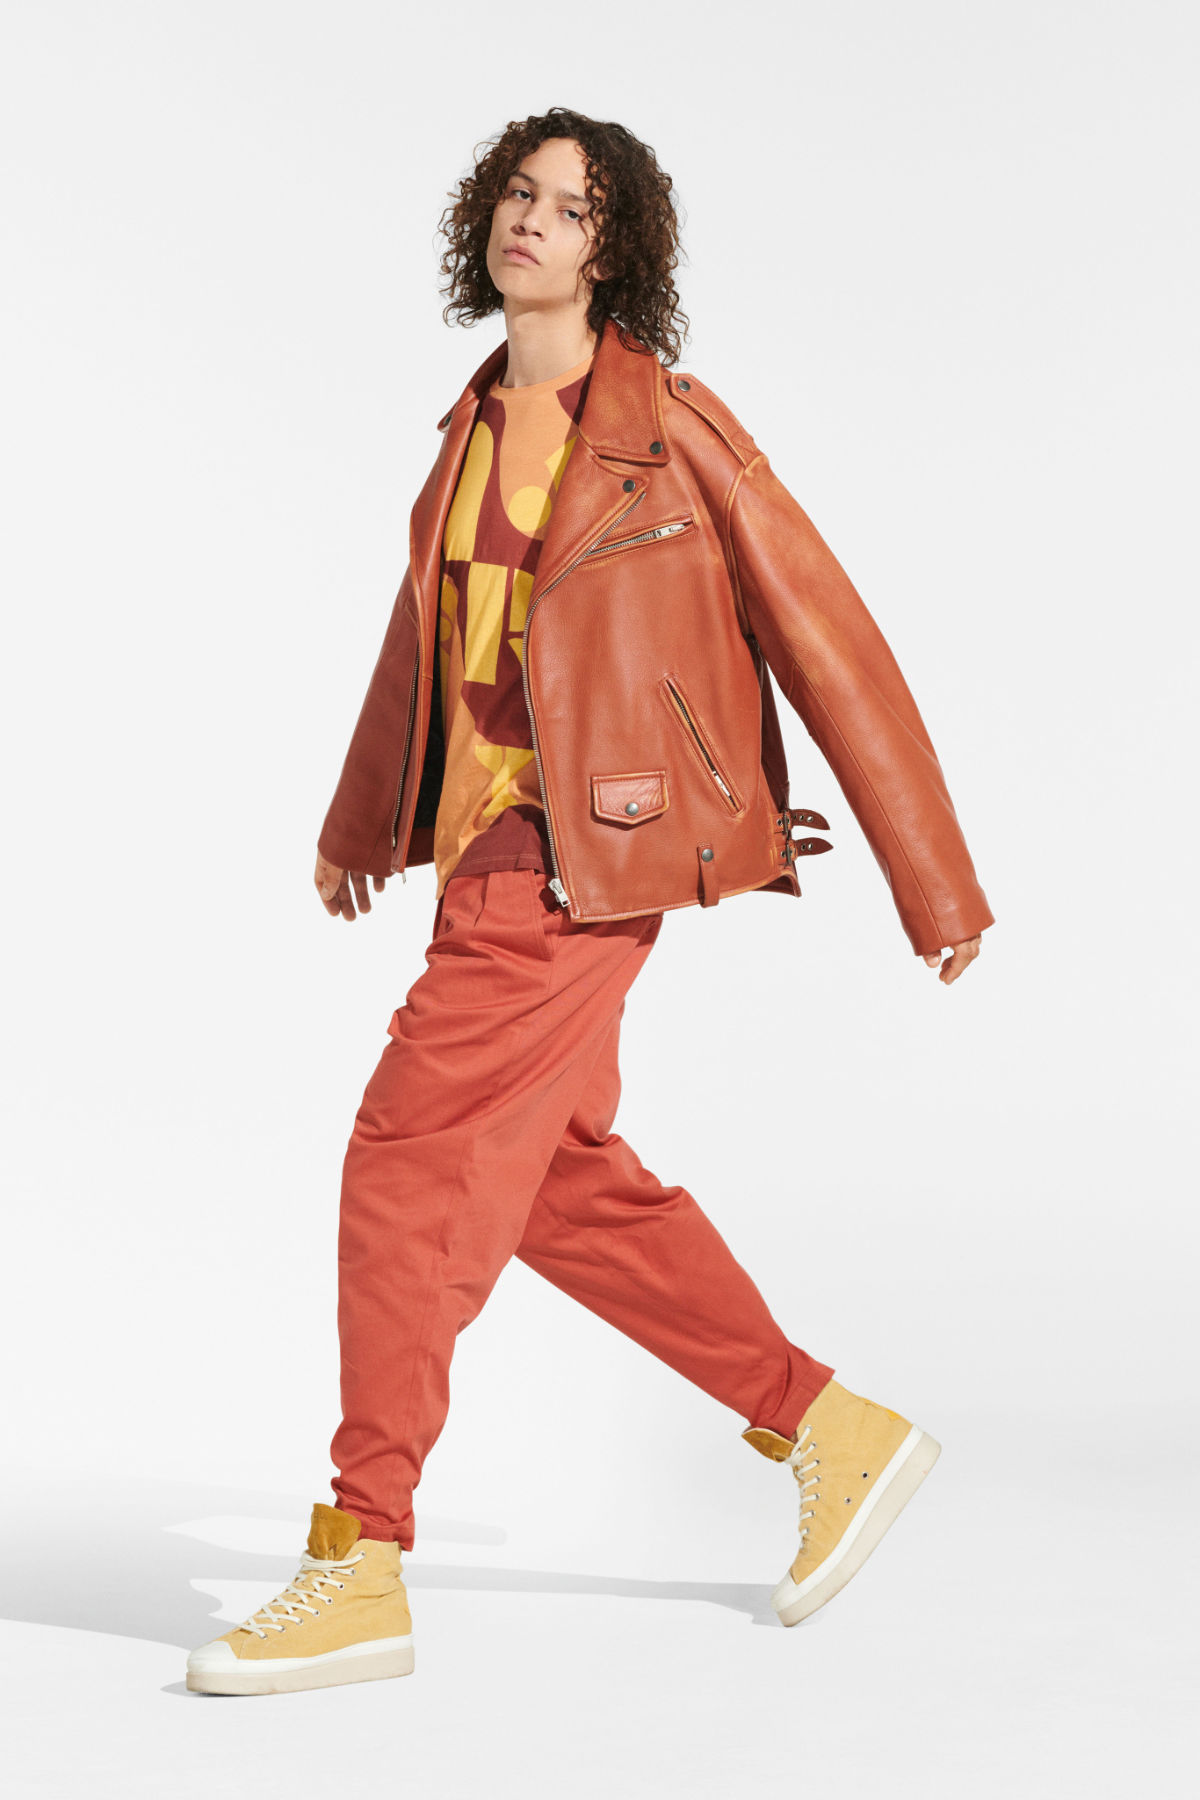 Isabel Marant Presents Its New Spring-Summer 2023 Menswear Collection